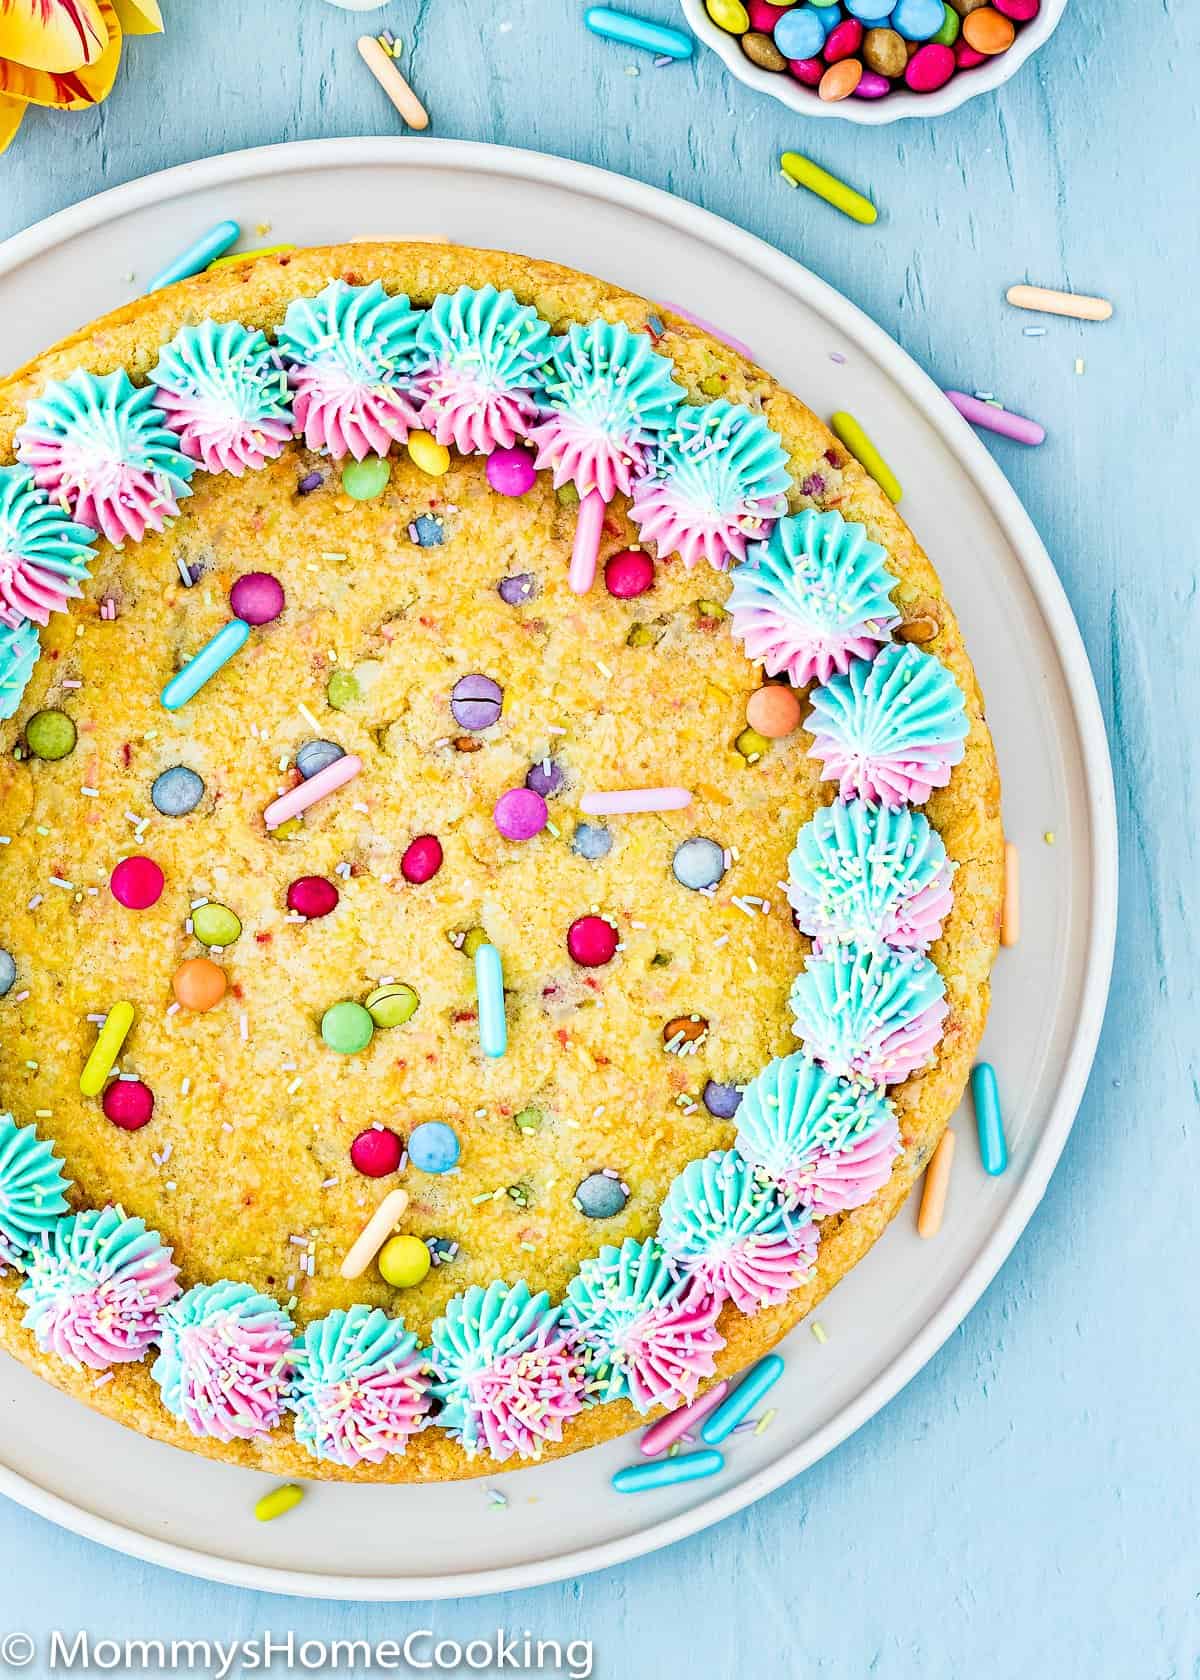 a whole Eggless Easter Sugar Cookie Cake decorated with buttercream and sprinkles